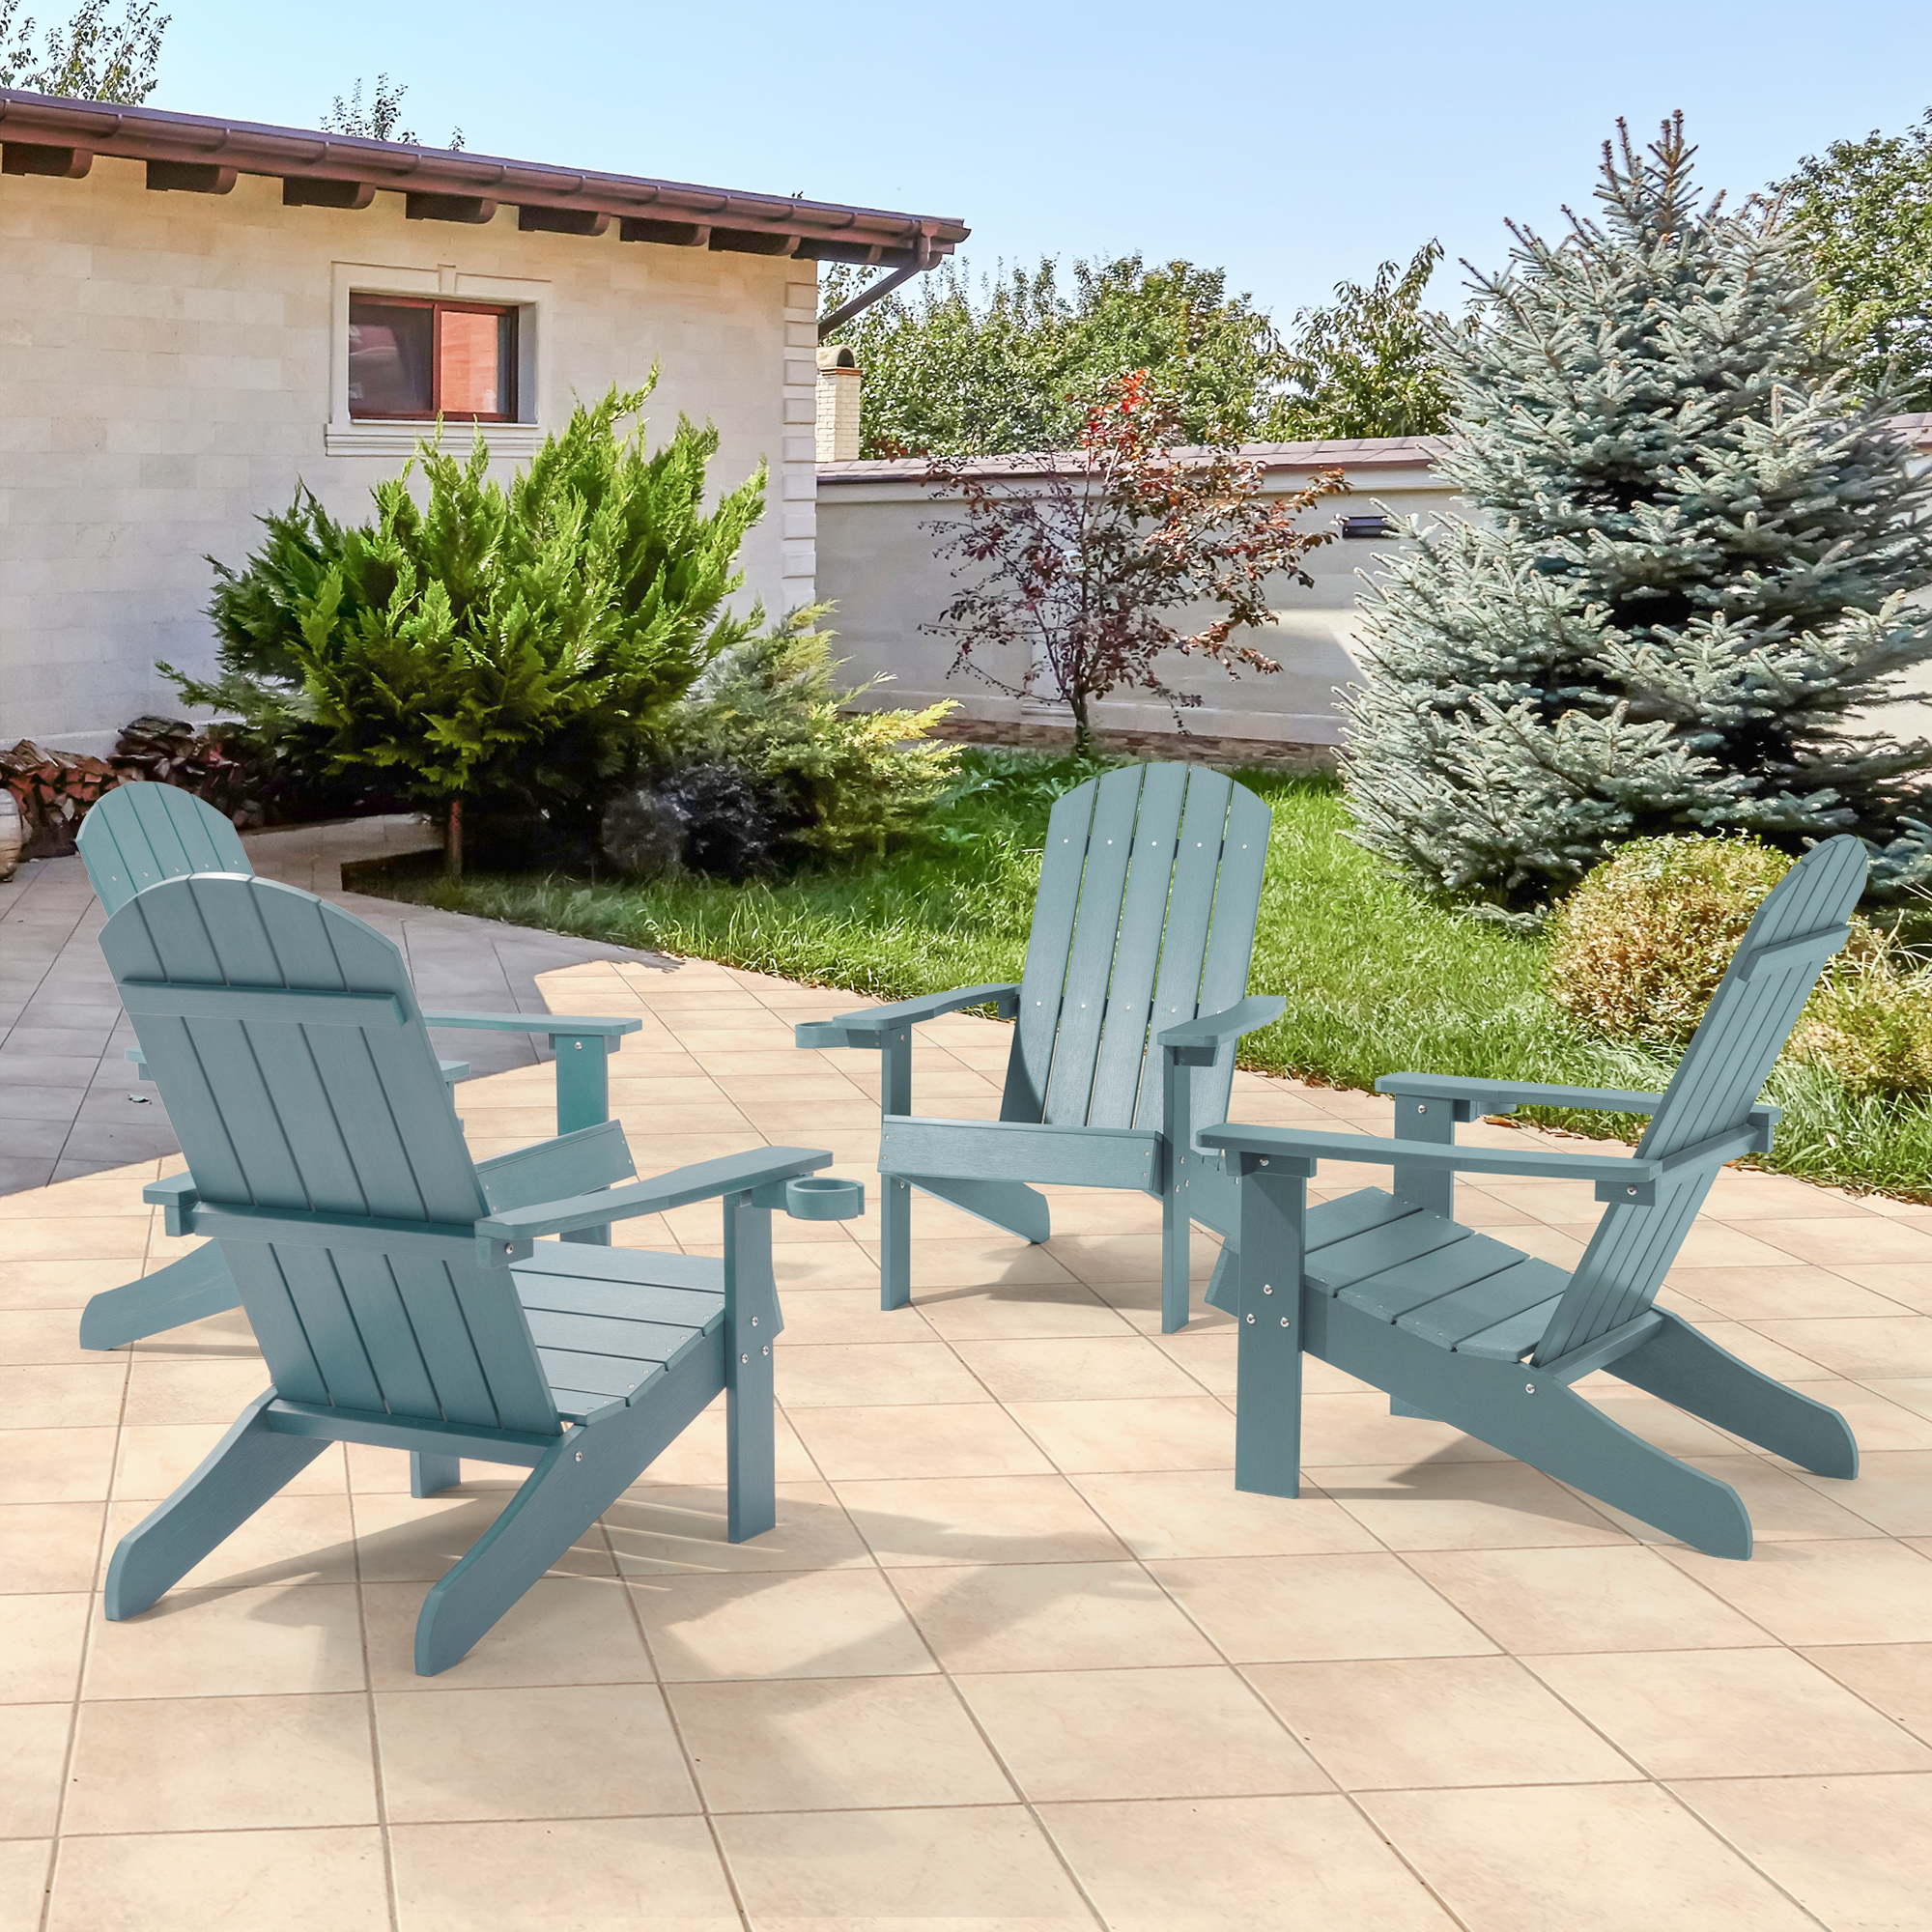 CHYVARY 1 Peak Patio Adirondack Plastic Fire Pit Chair Outdoor Resin Outside Lounge Chair for Yard, deck, lawn and balcony,Lake Blue - image 2 of 9